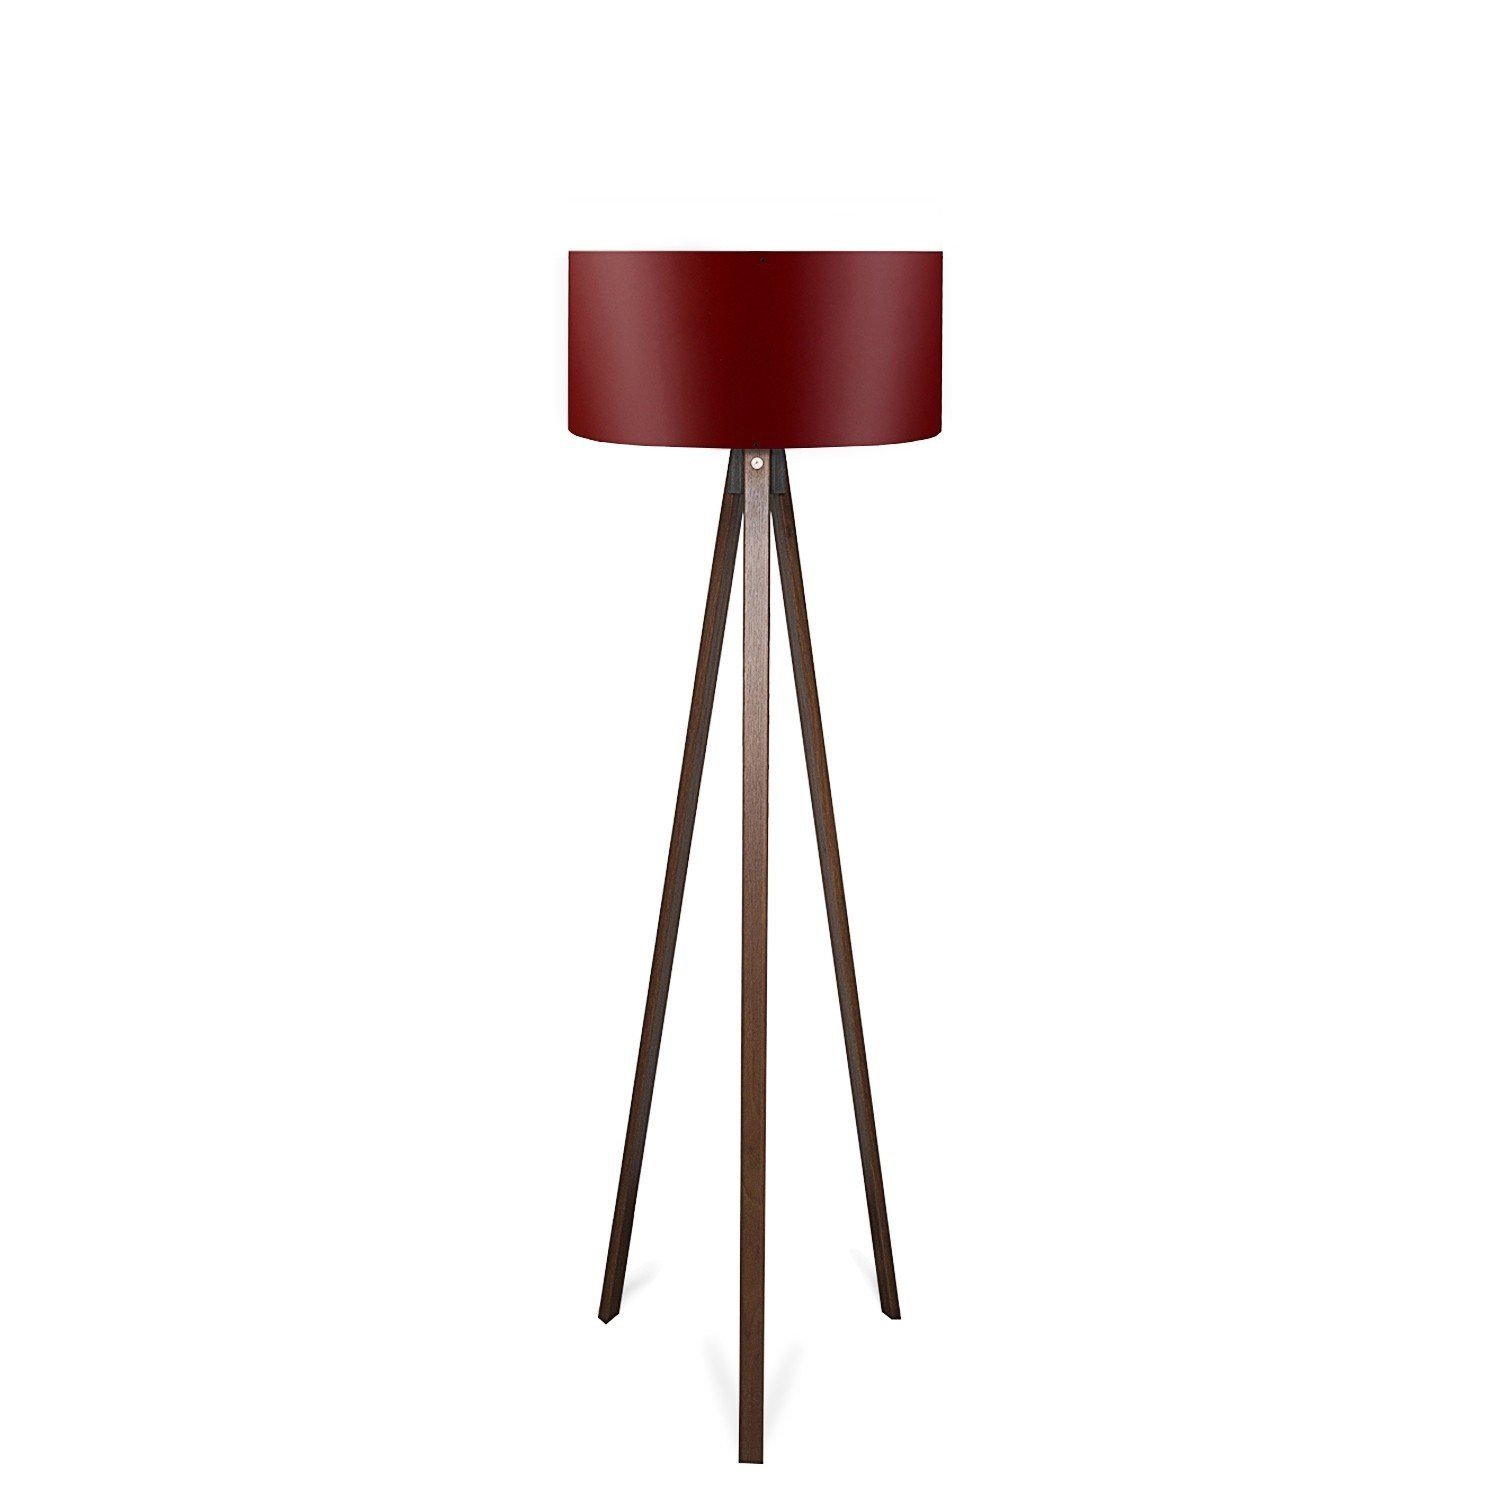 SGN, 100% Stehlampe Opviq Claret,Red, MDF AYD